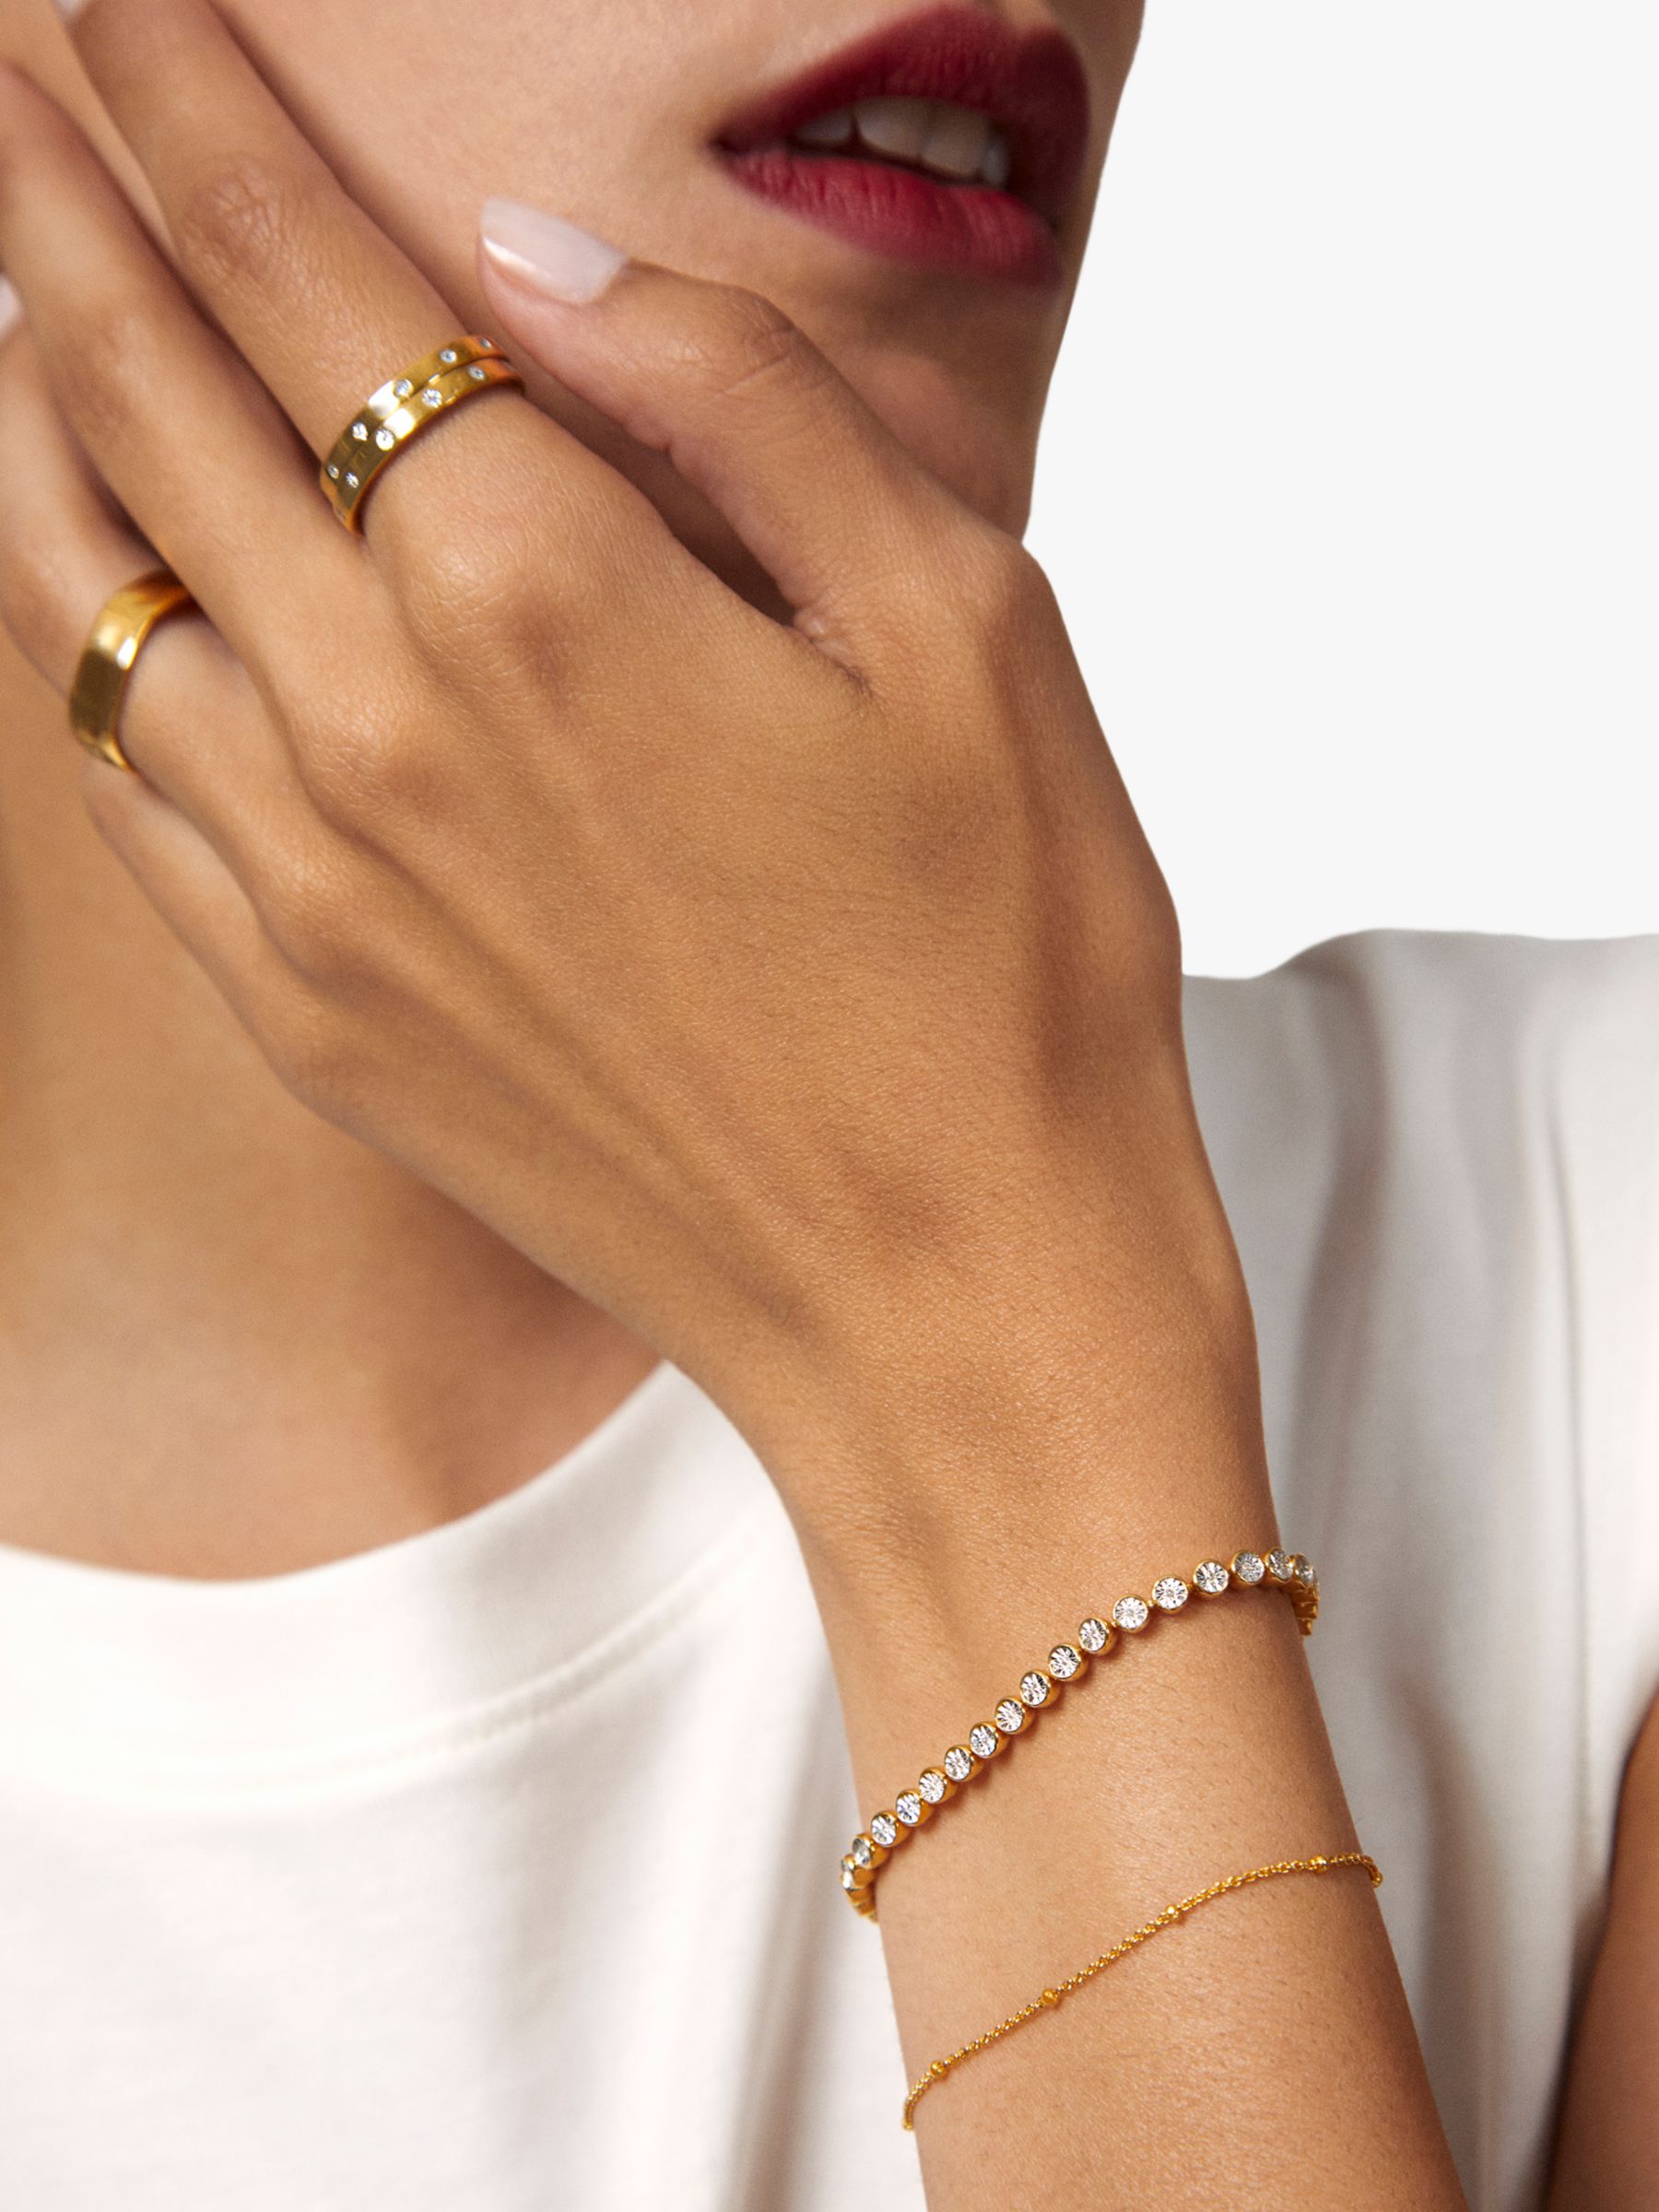 The iconic Cartier Love bracelet gets a new brushed finish